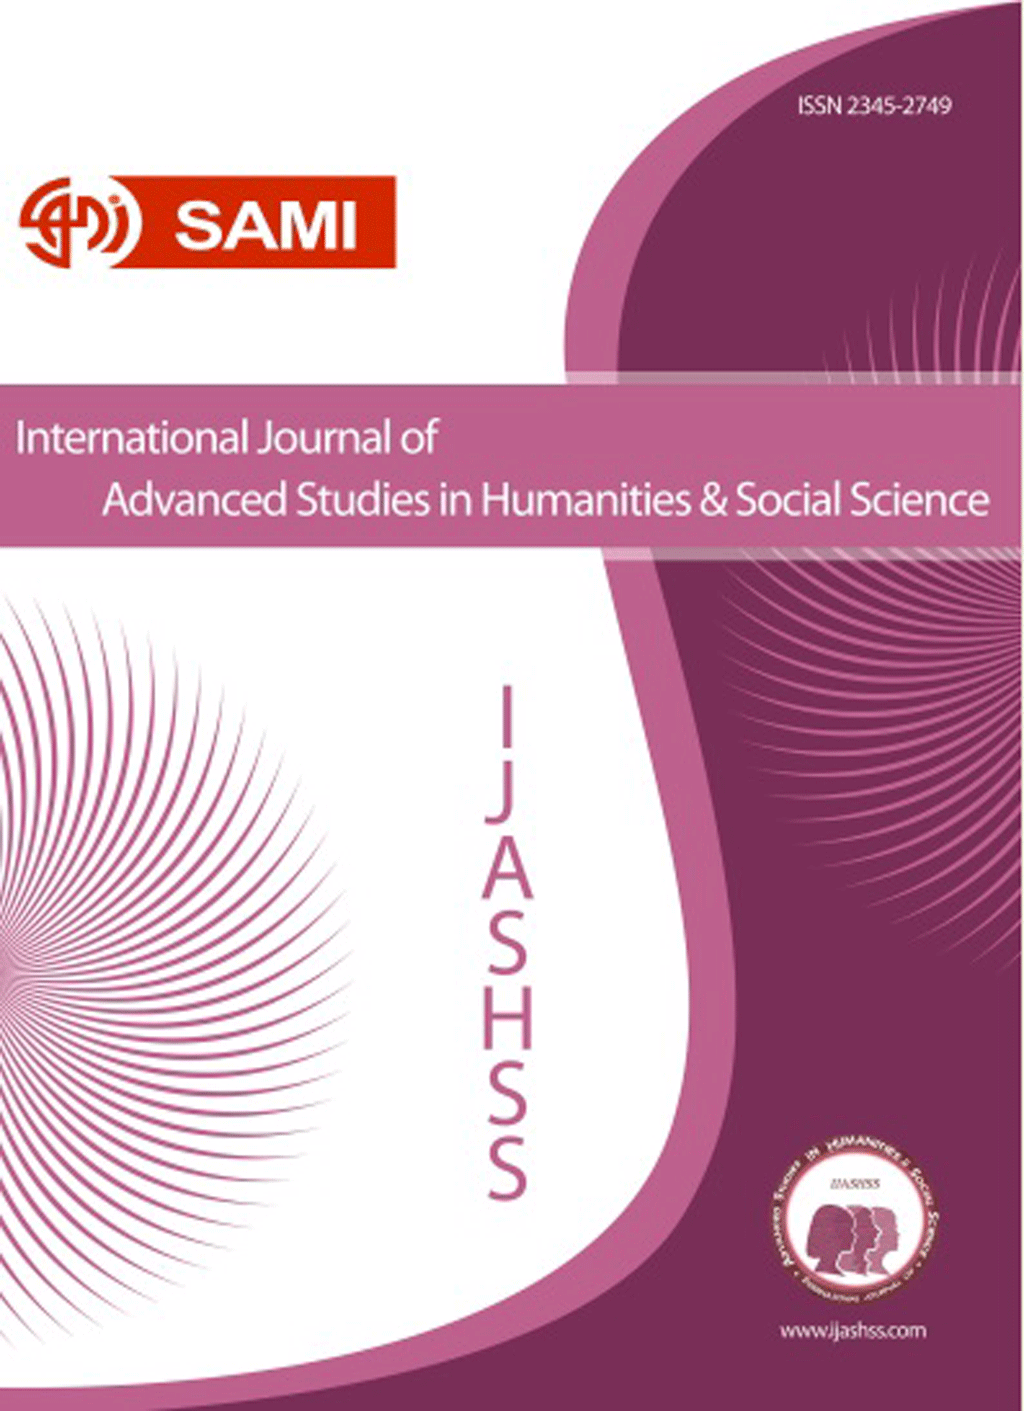 International Journal of Advanced Studies in Humanities and Social Science - July 2018, Volume 7 - Issue 3